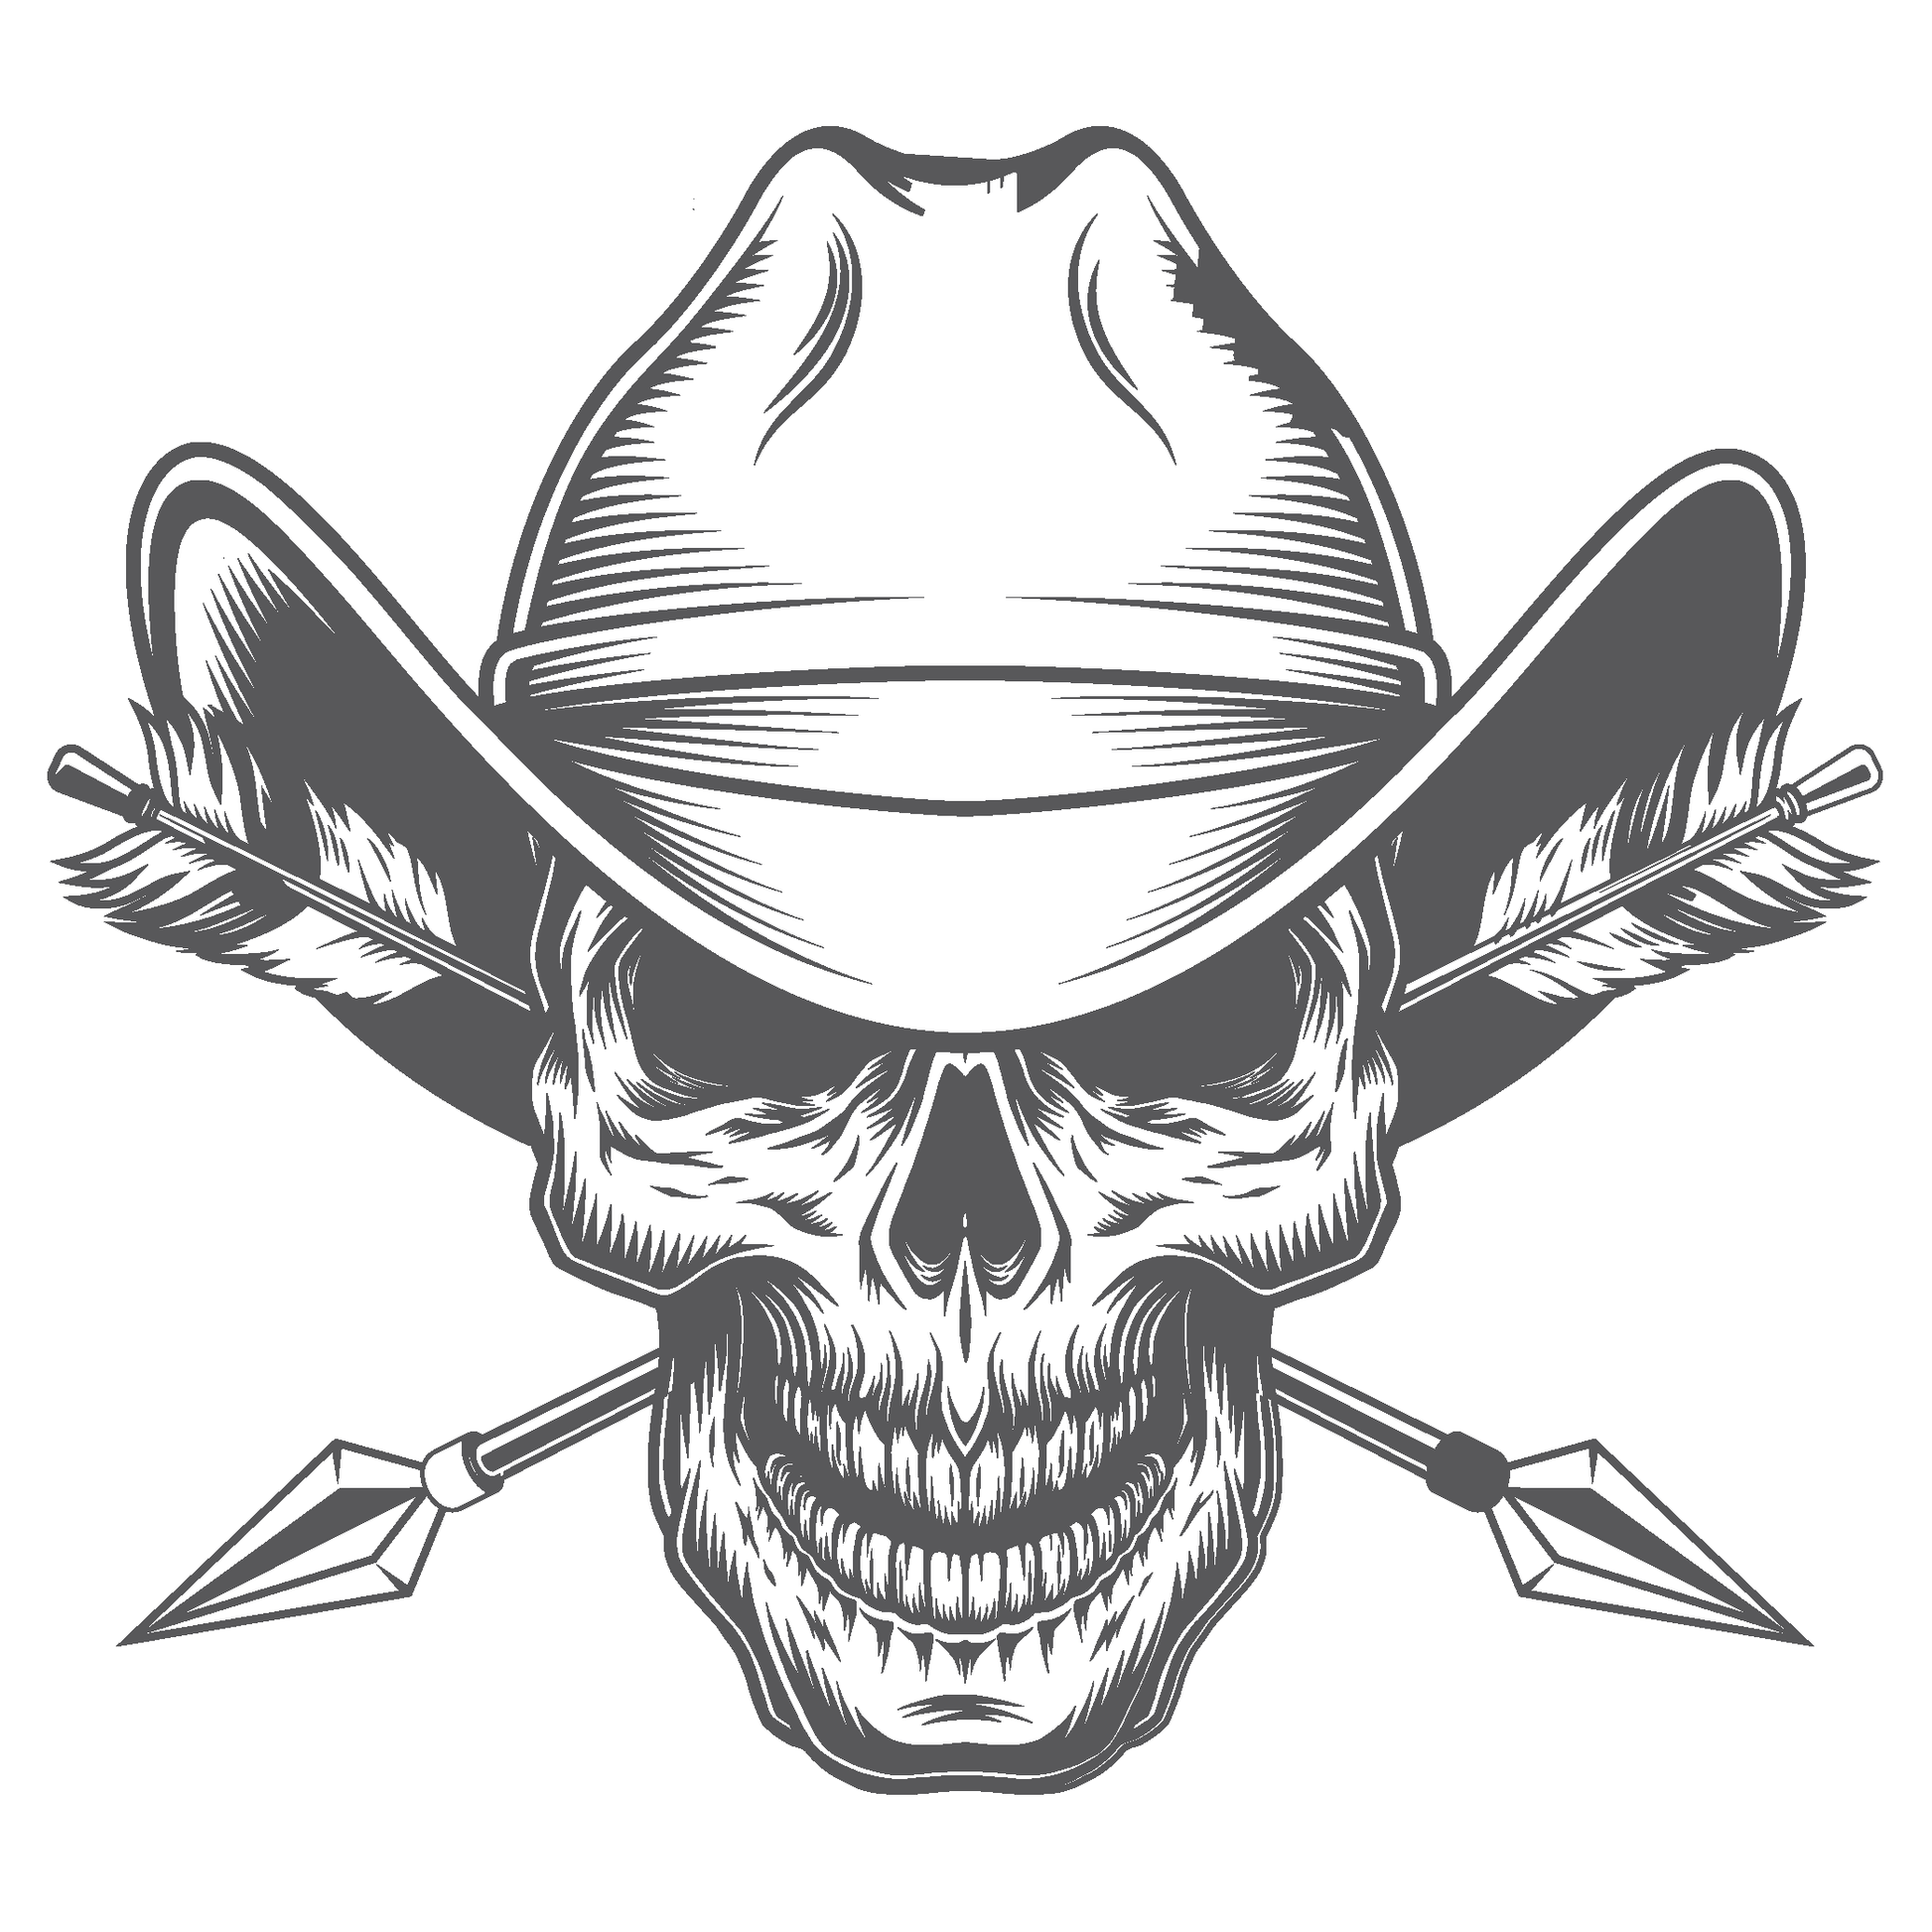 ShopVinylDesignStore.com Skull (Cowboy) and Arrows for Corn Hole Boards Wide Style 007 Shop Vinyl Design decals stickers